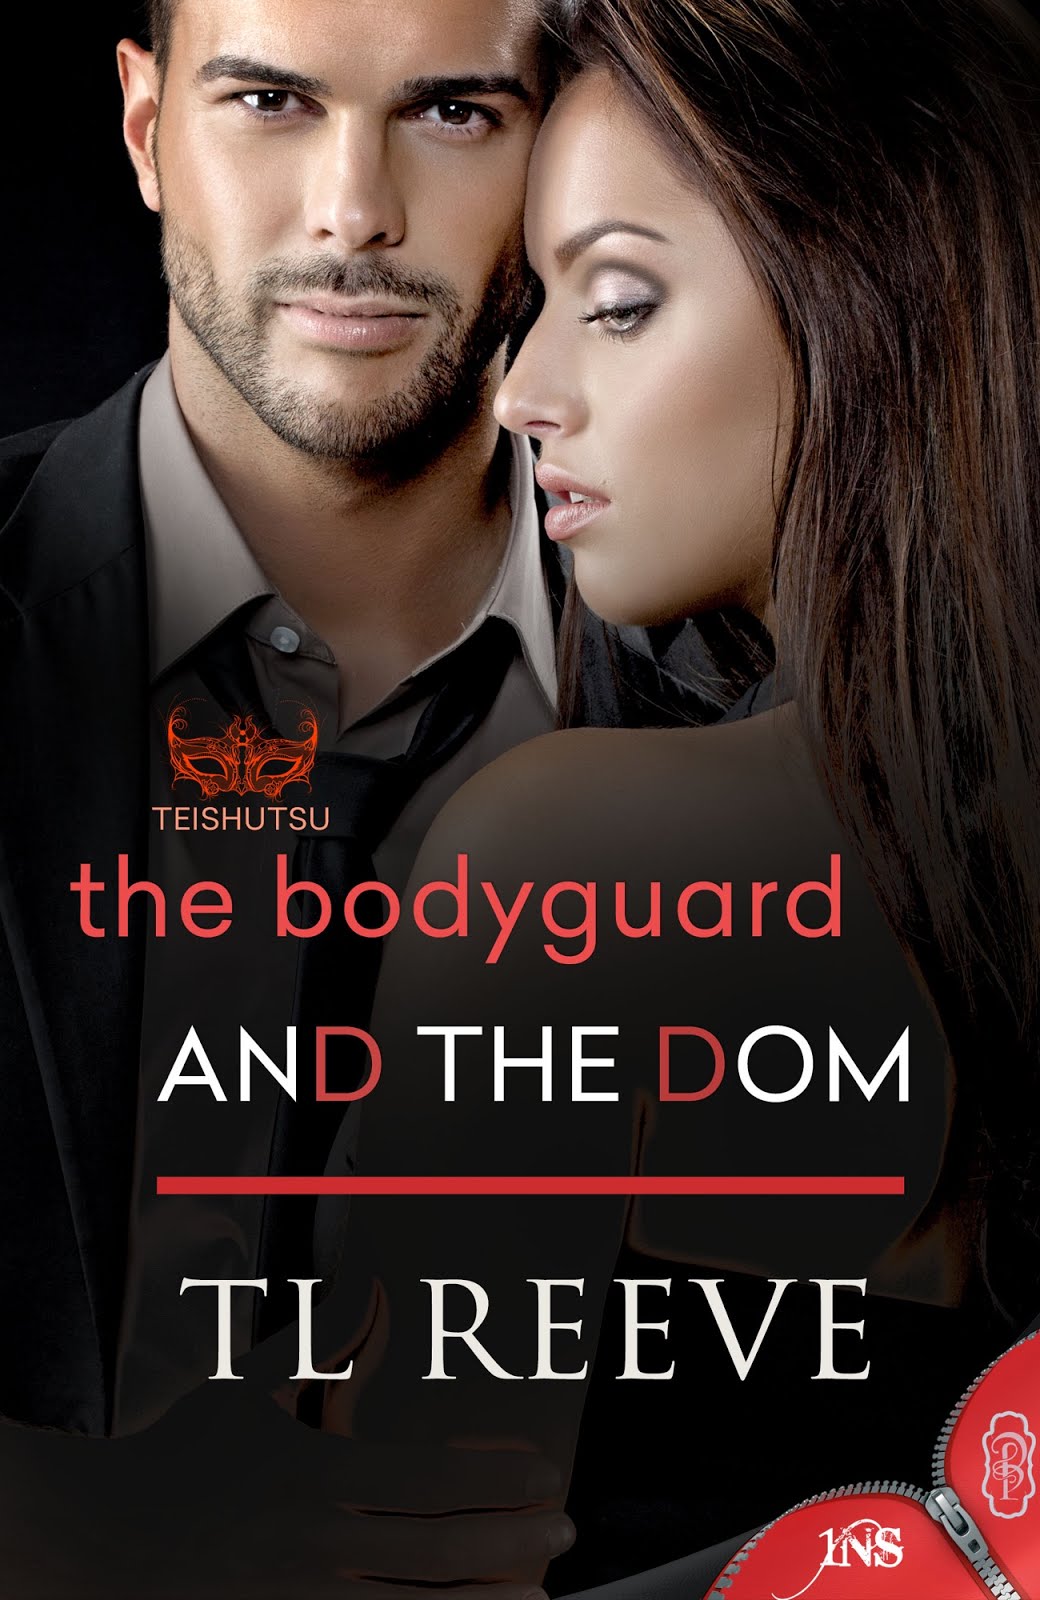 The Bodyguard and The Dom